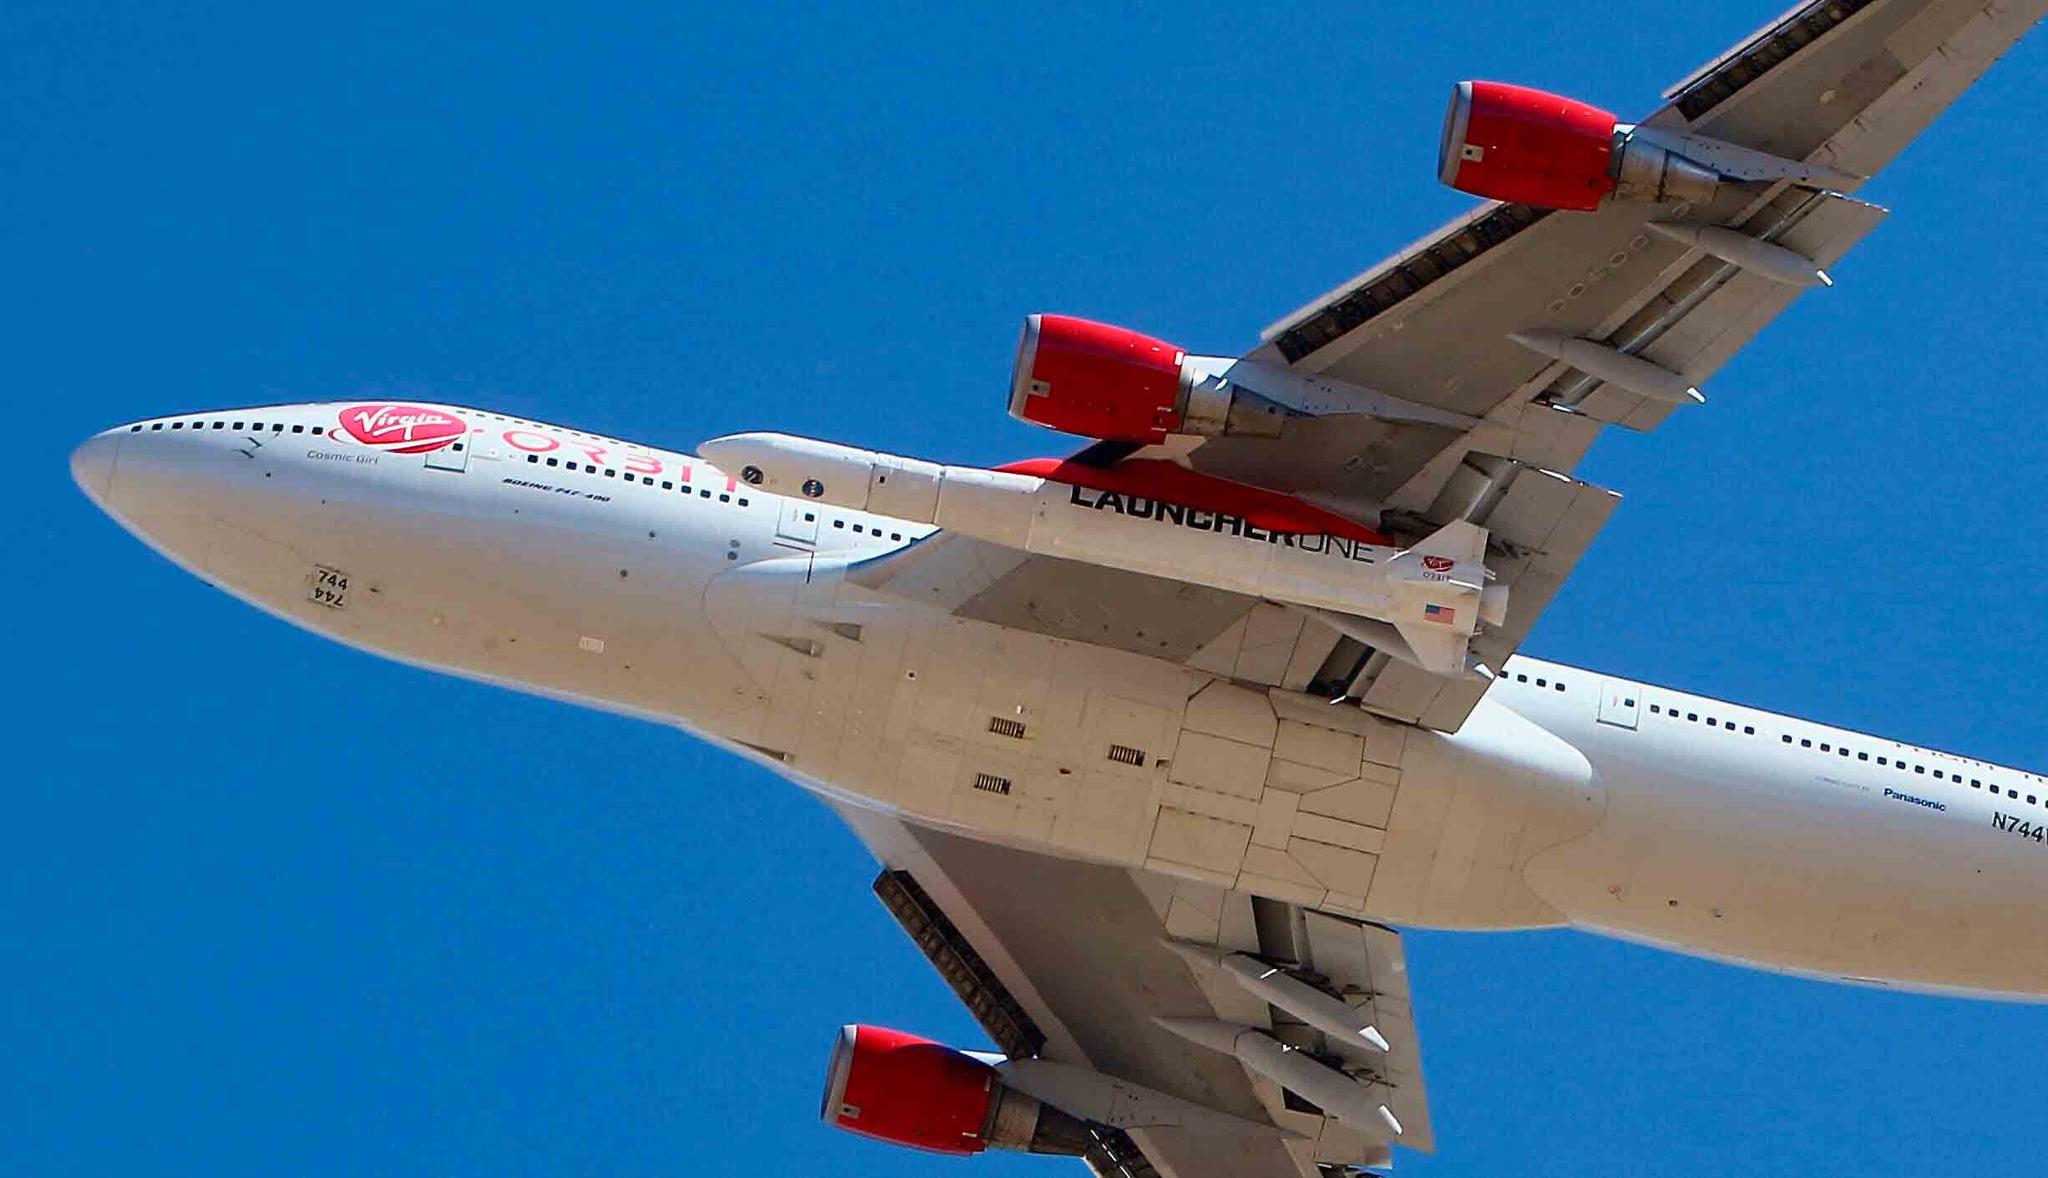 Virgin Orbit Boeing 747-400 rocket launch platform, named Cosmic Girl, takes off from Mojave Air and Space Port, Mojave (MHV) on its second orbital launch demonstration in the Mojave Desert, north of Los Angeles. 